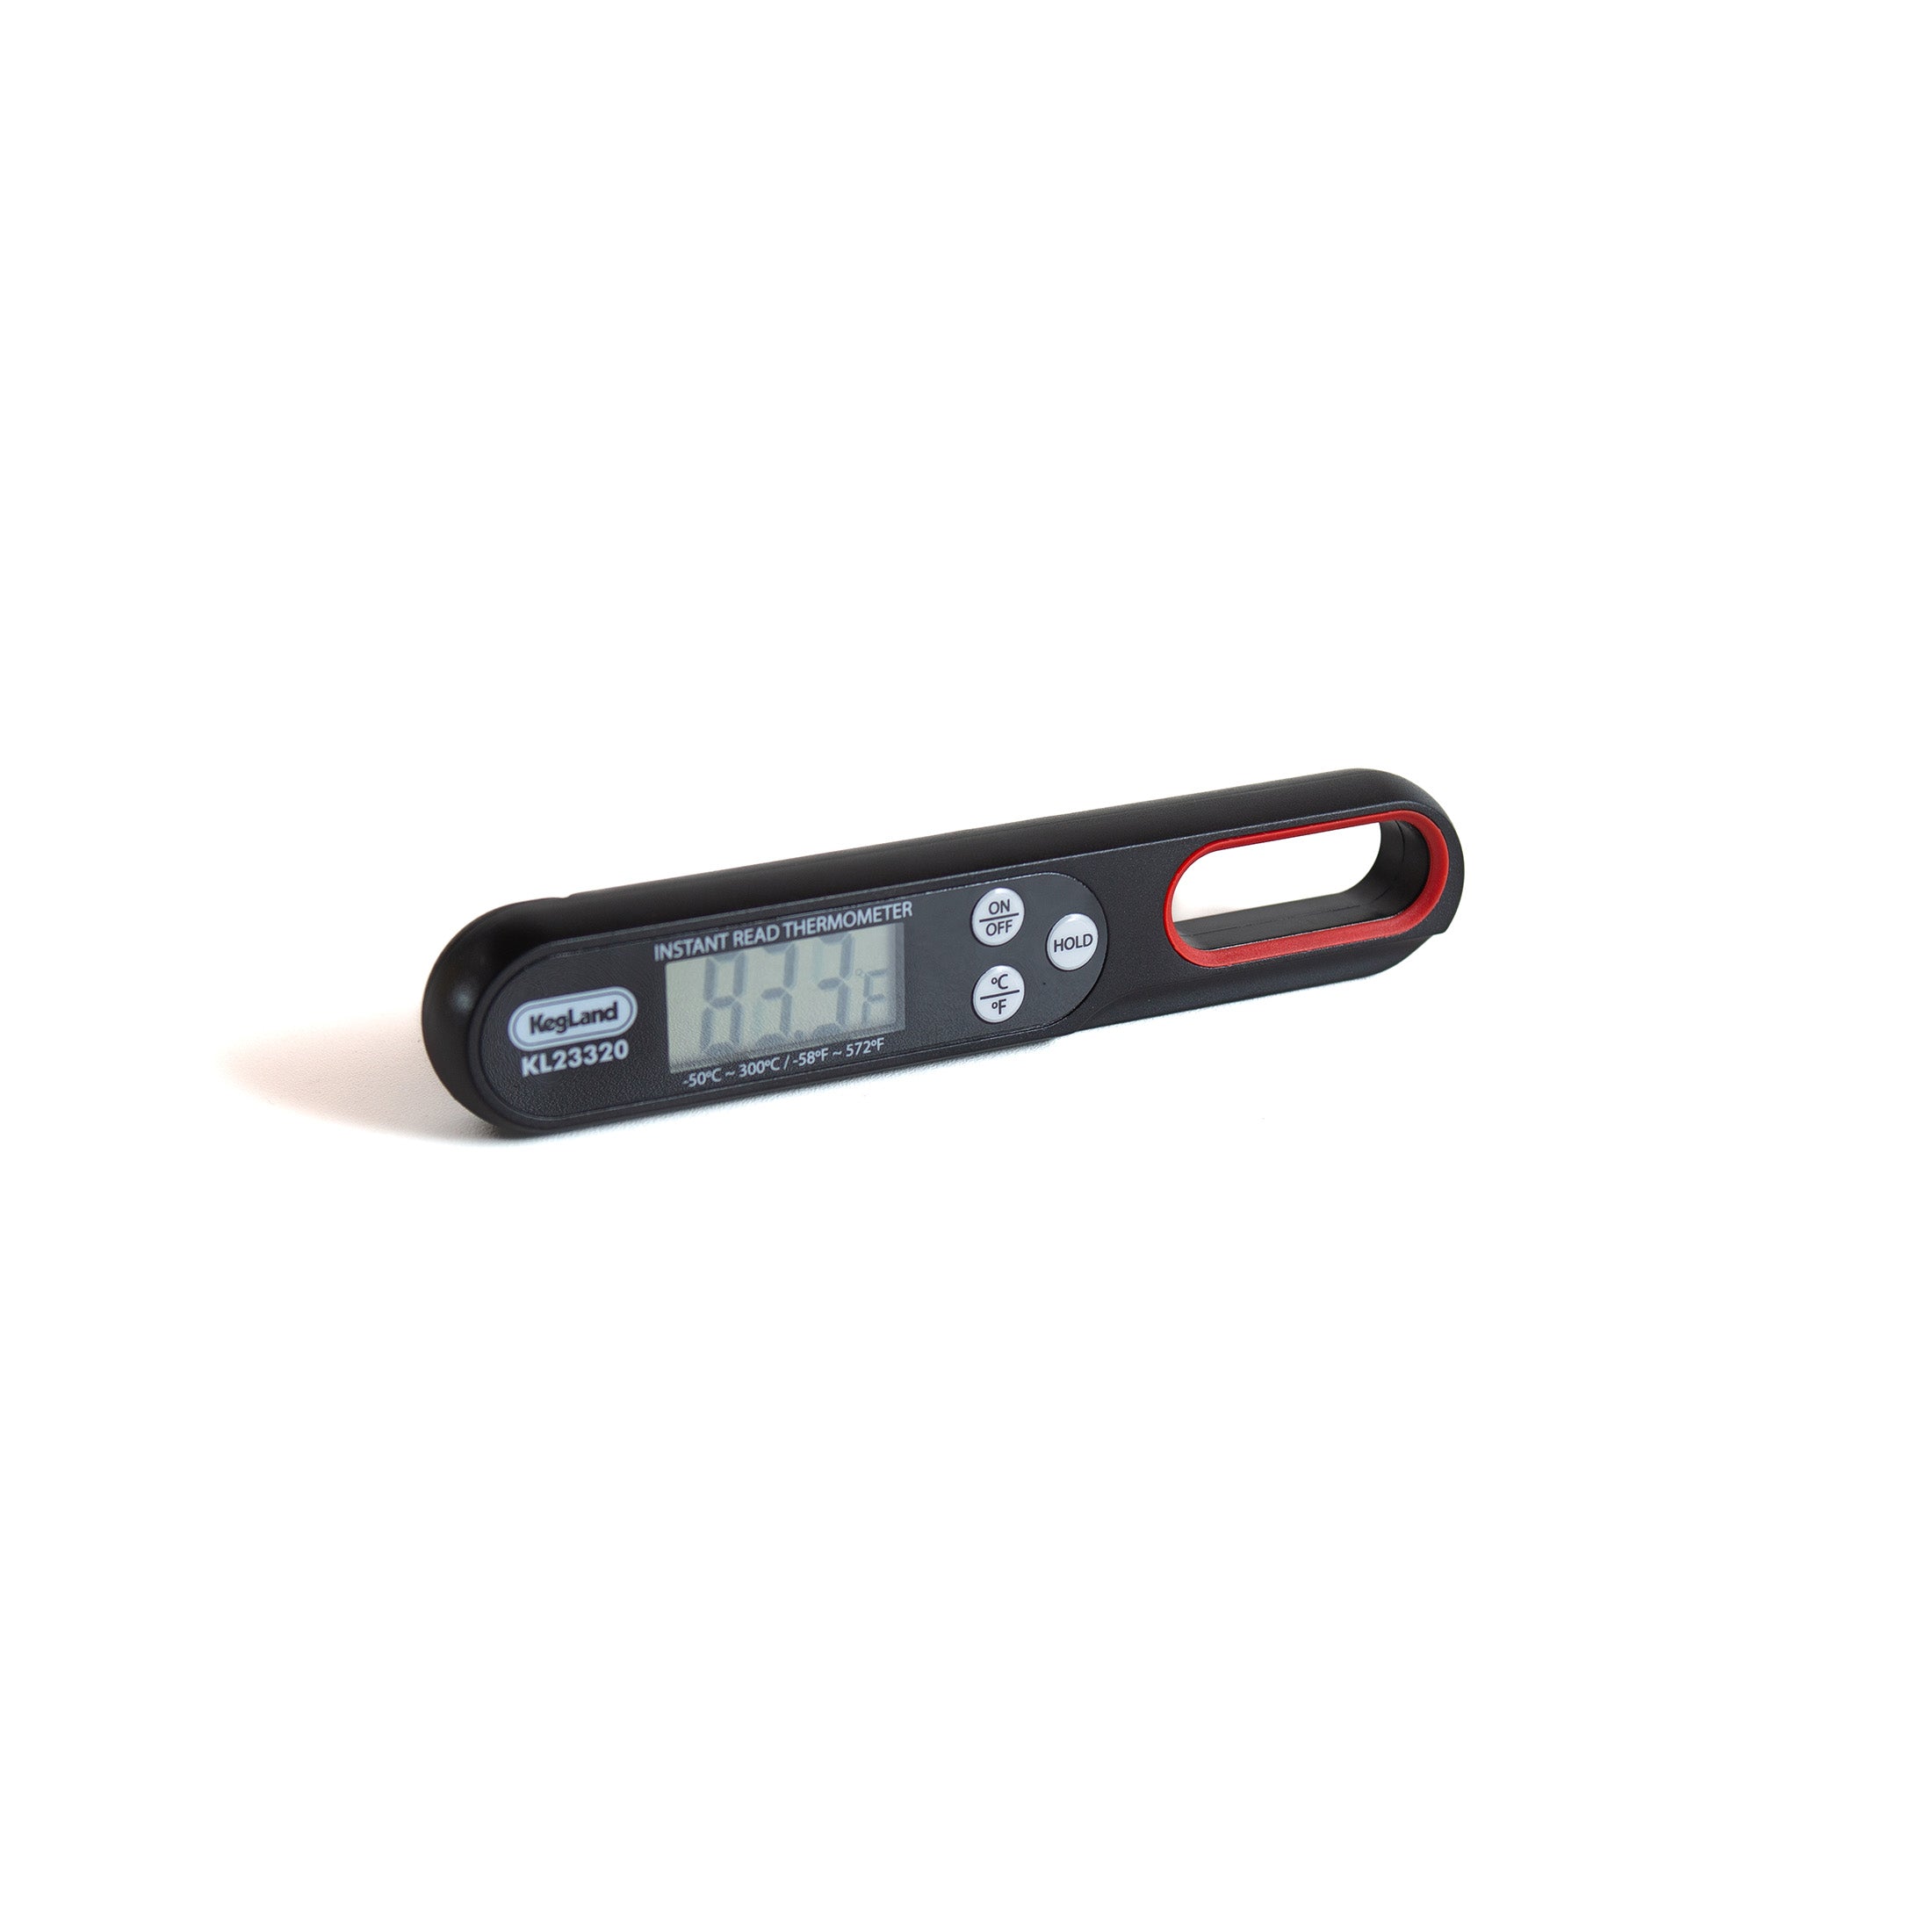 Remote Digital Sanitary Brewing Thermometer - Reotemp Brew